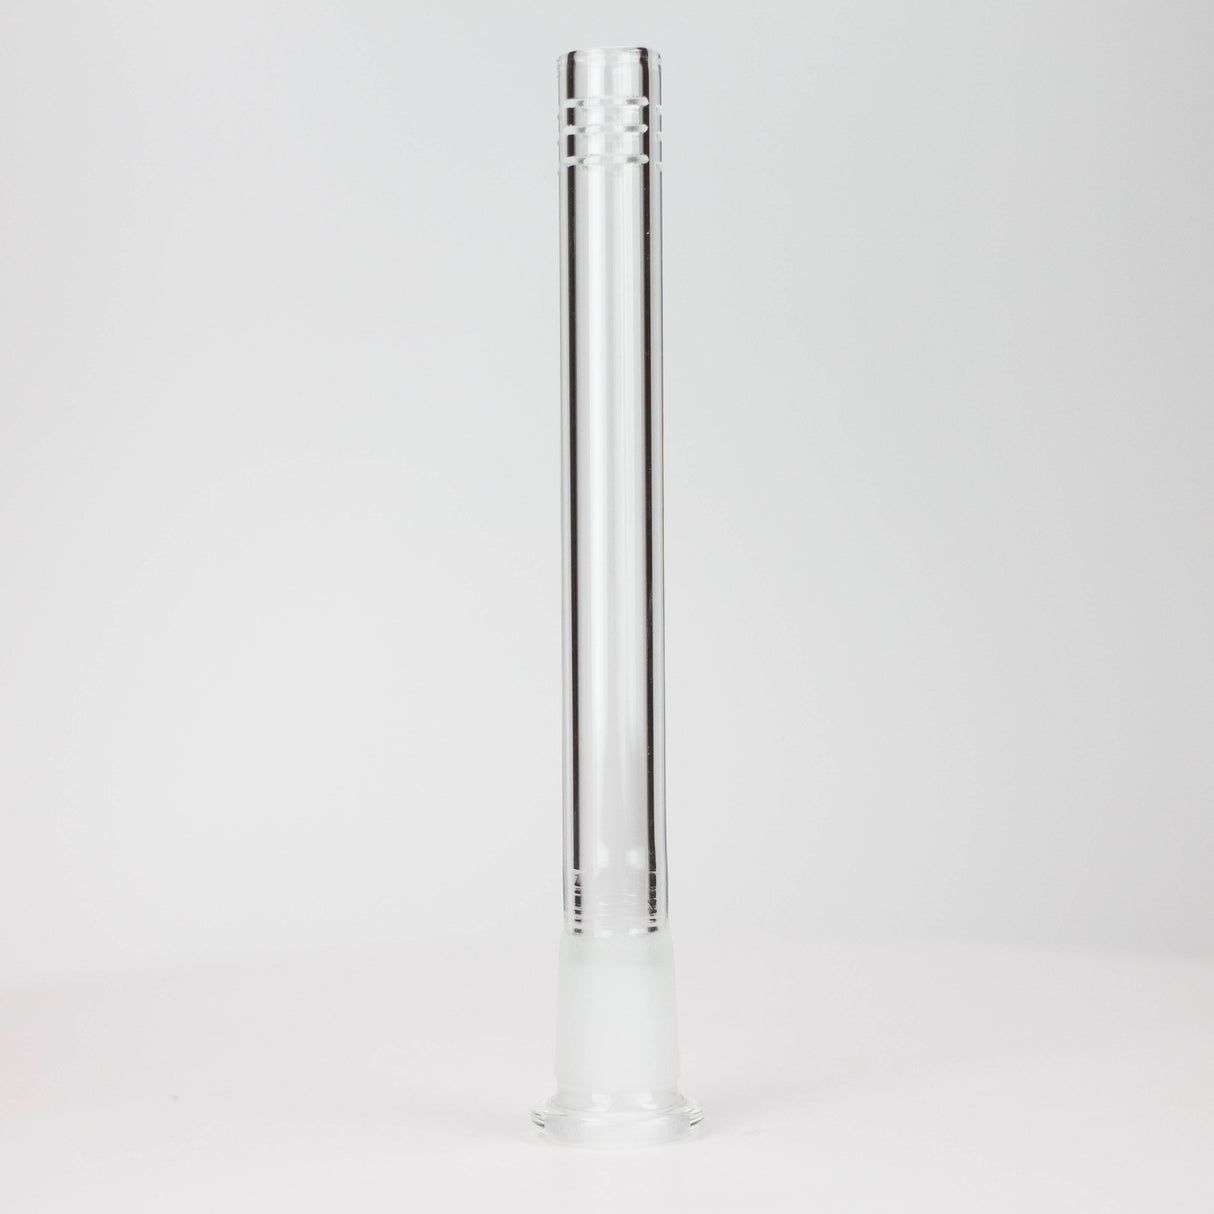 Glass Slitted Glass Diffuser Downstem 6 size mixed Pack of 12